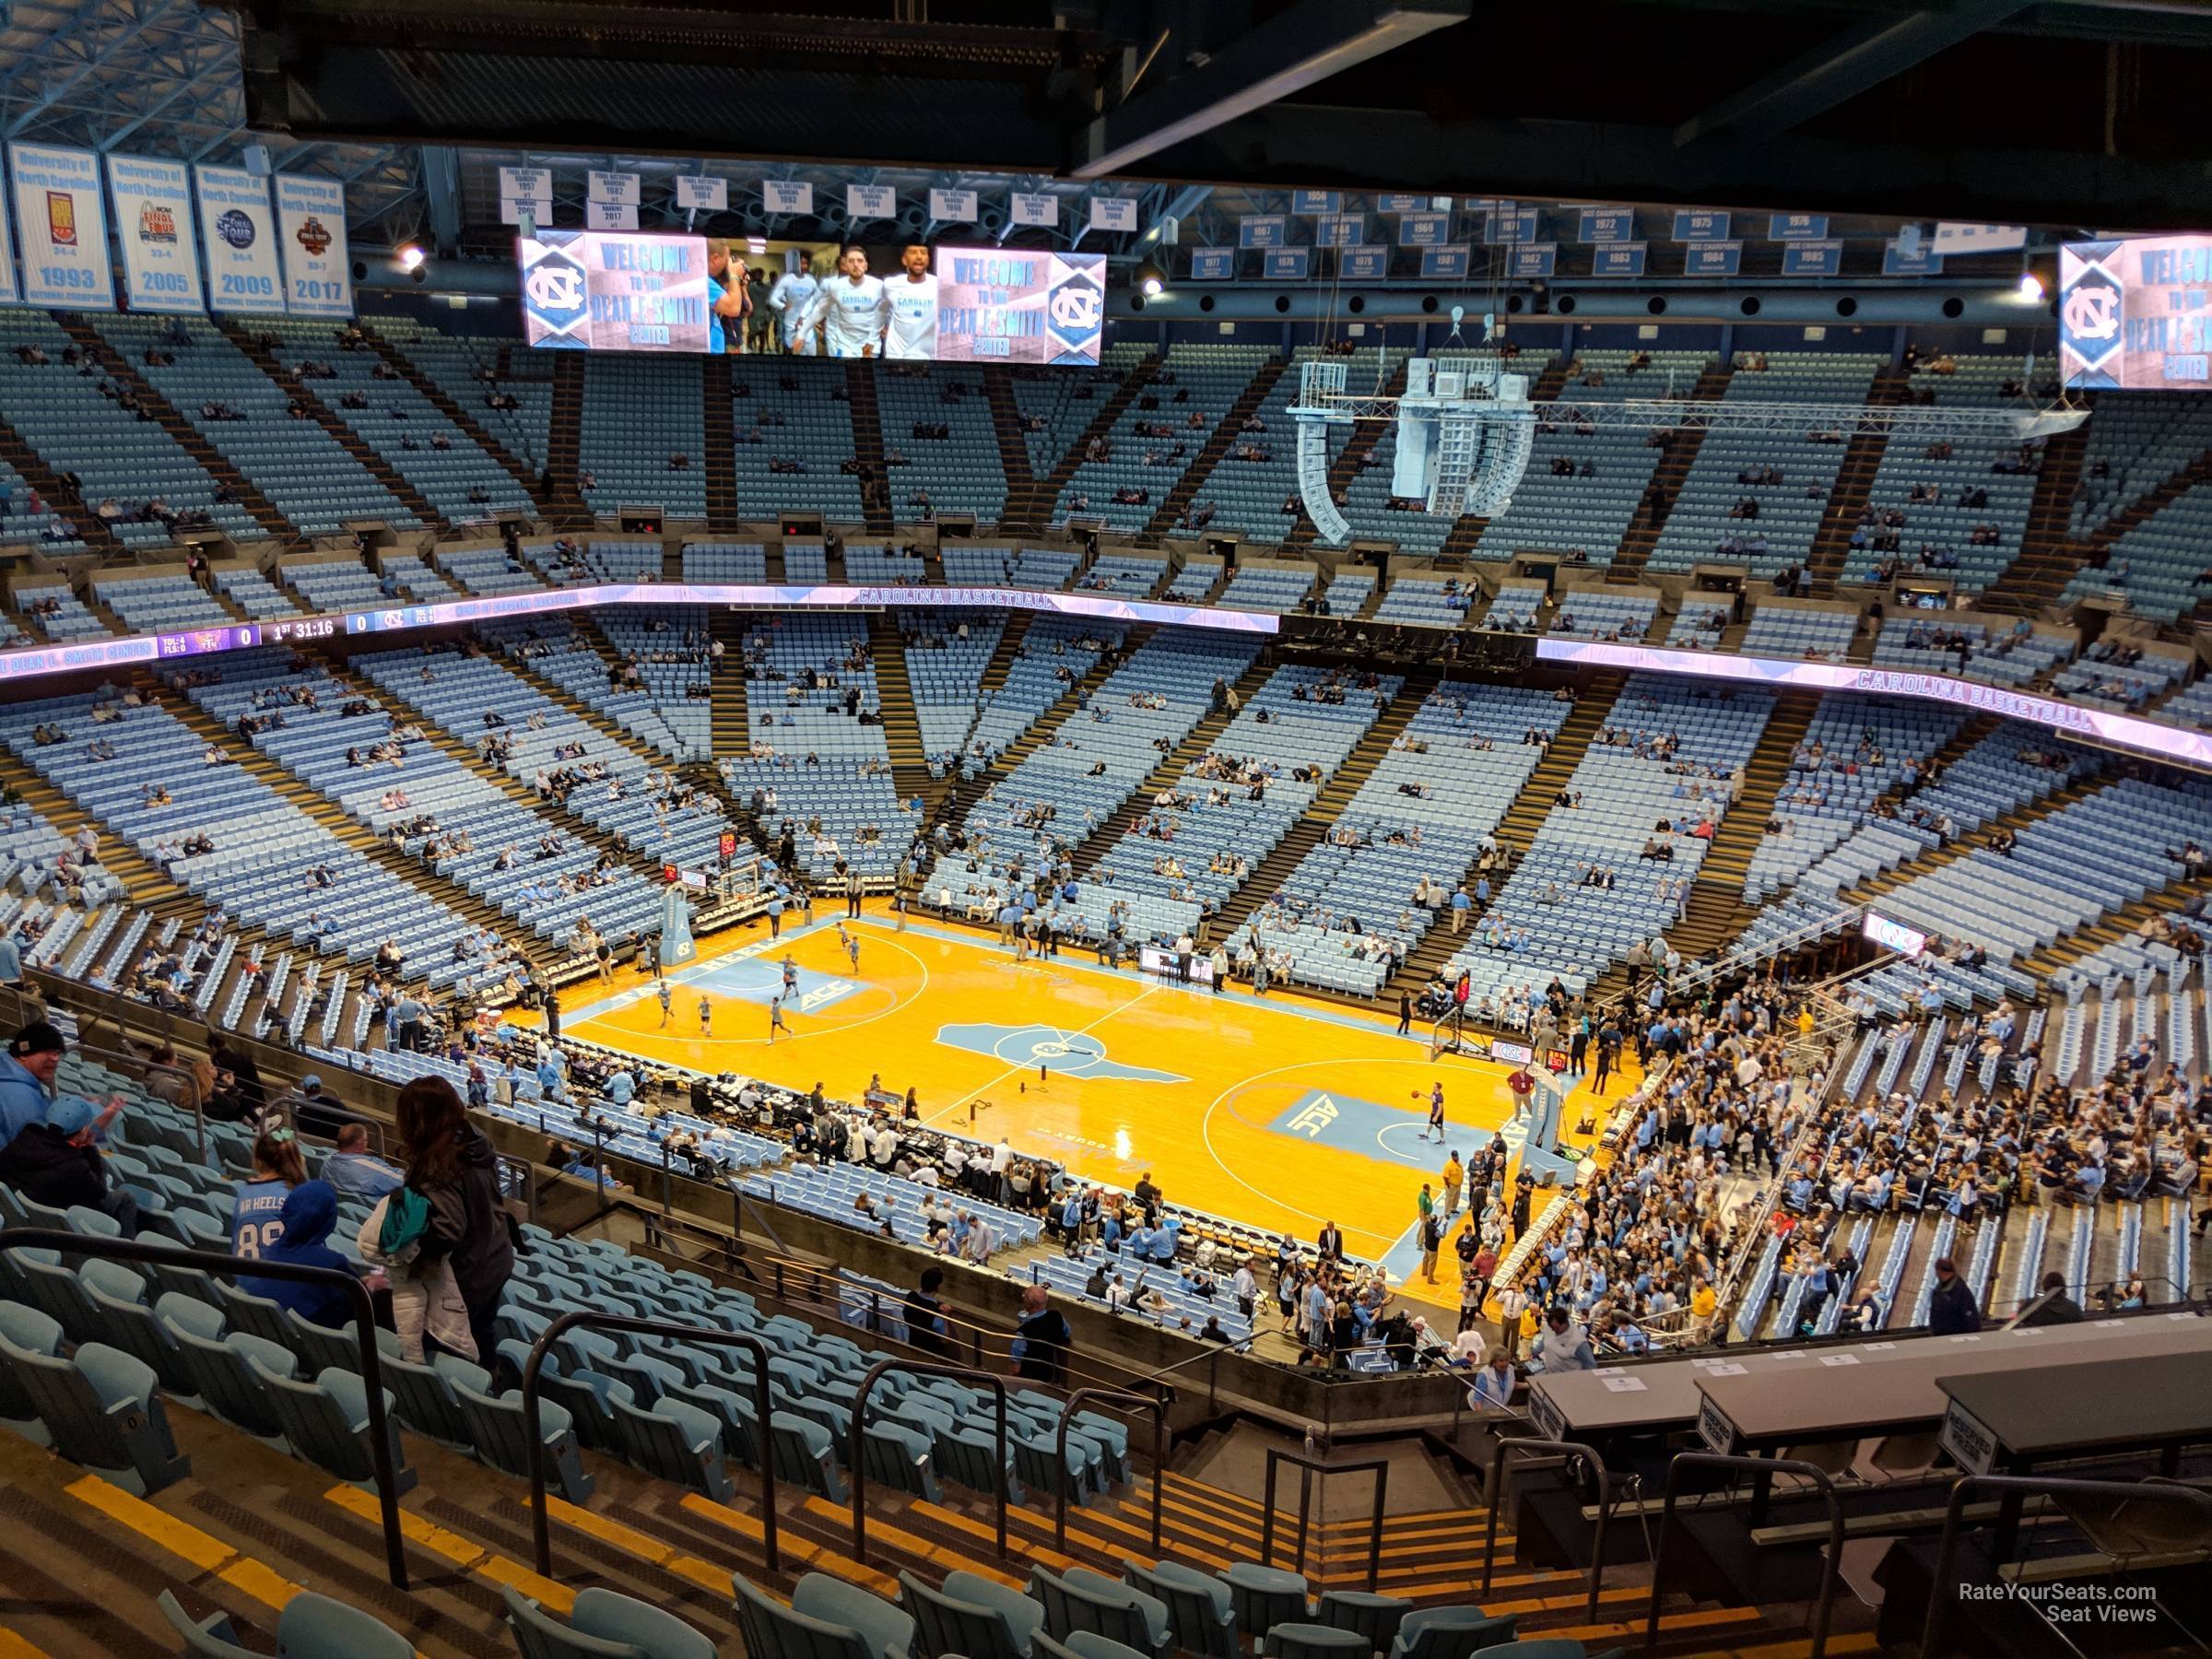 section 211a, row s seat view  - dean smith center